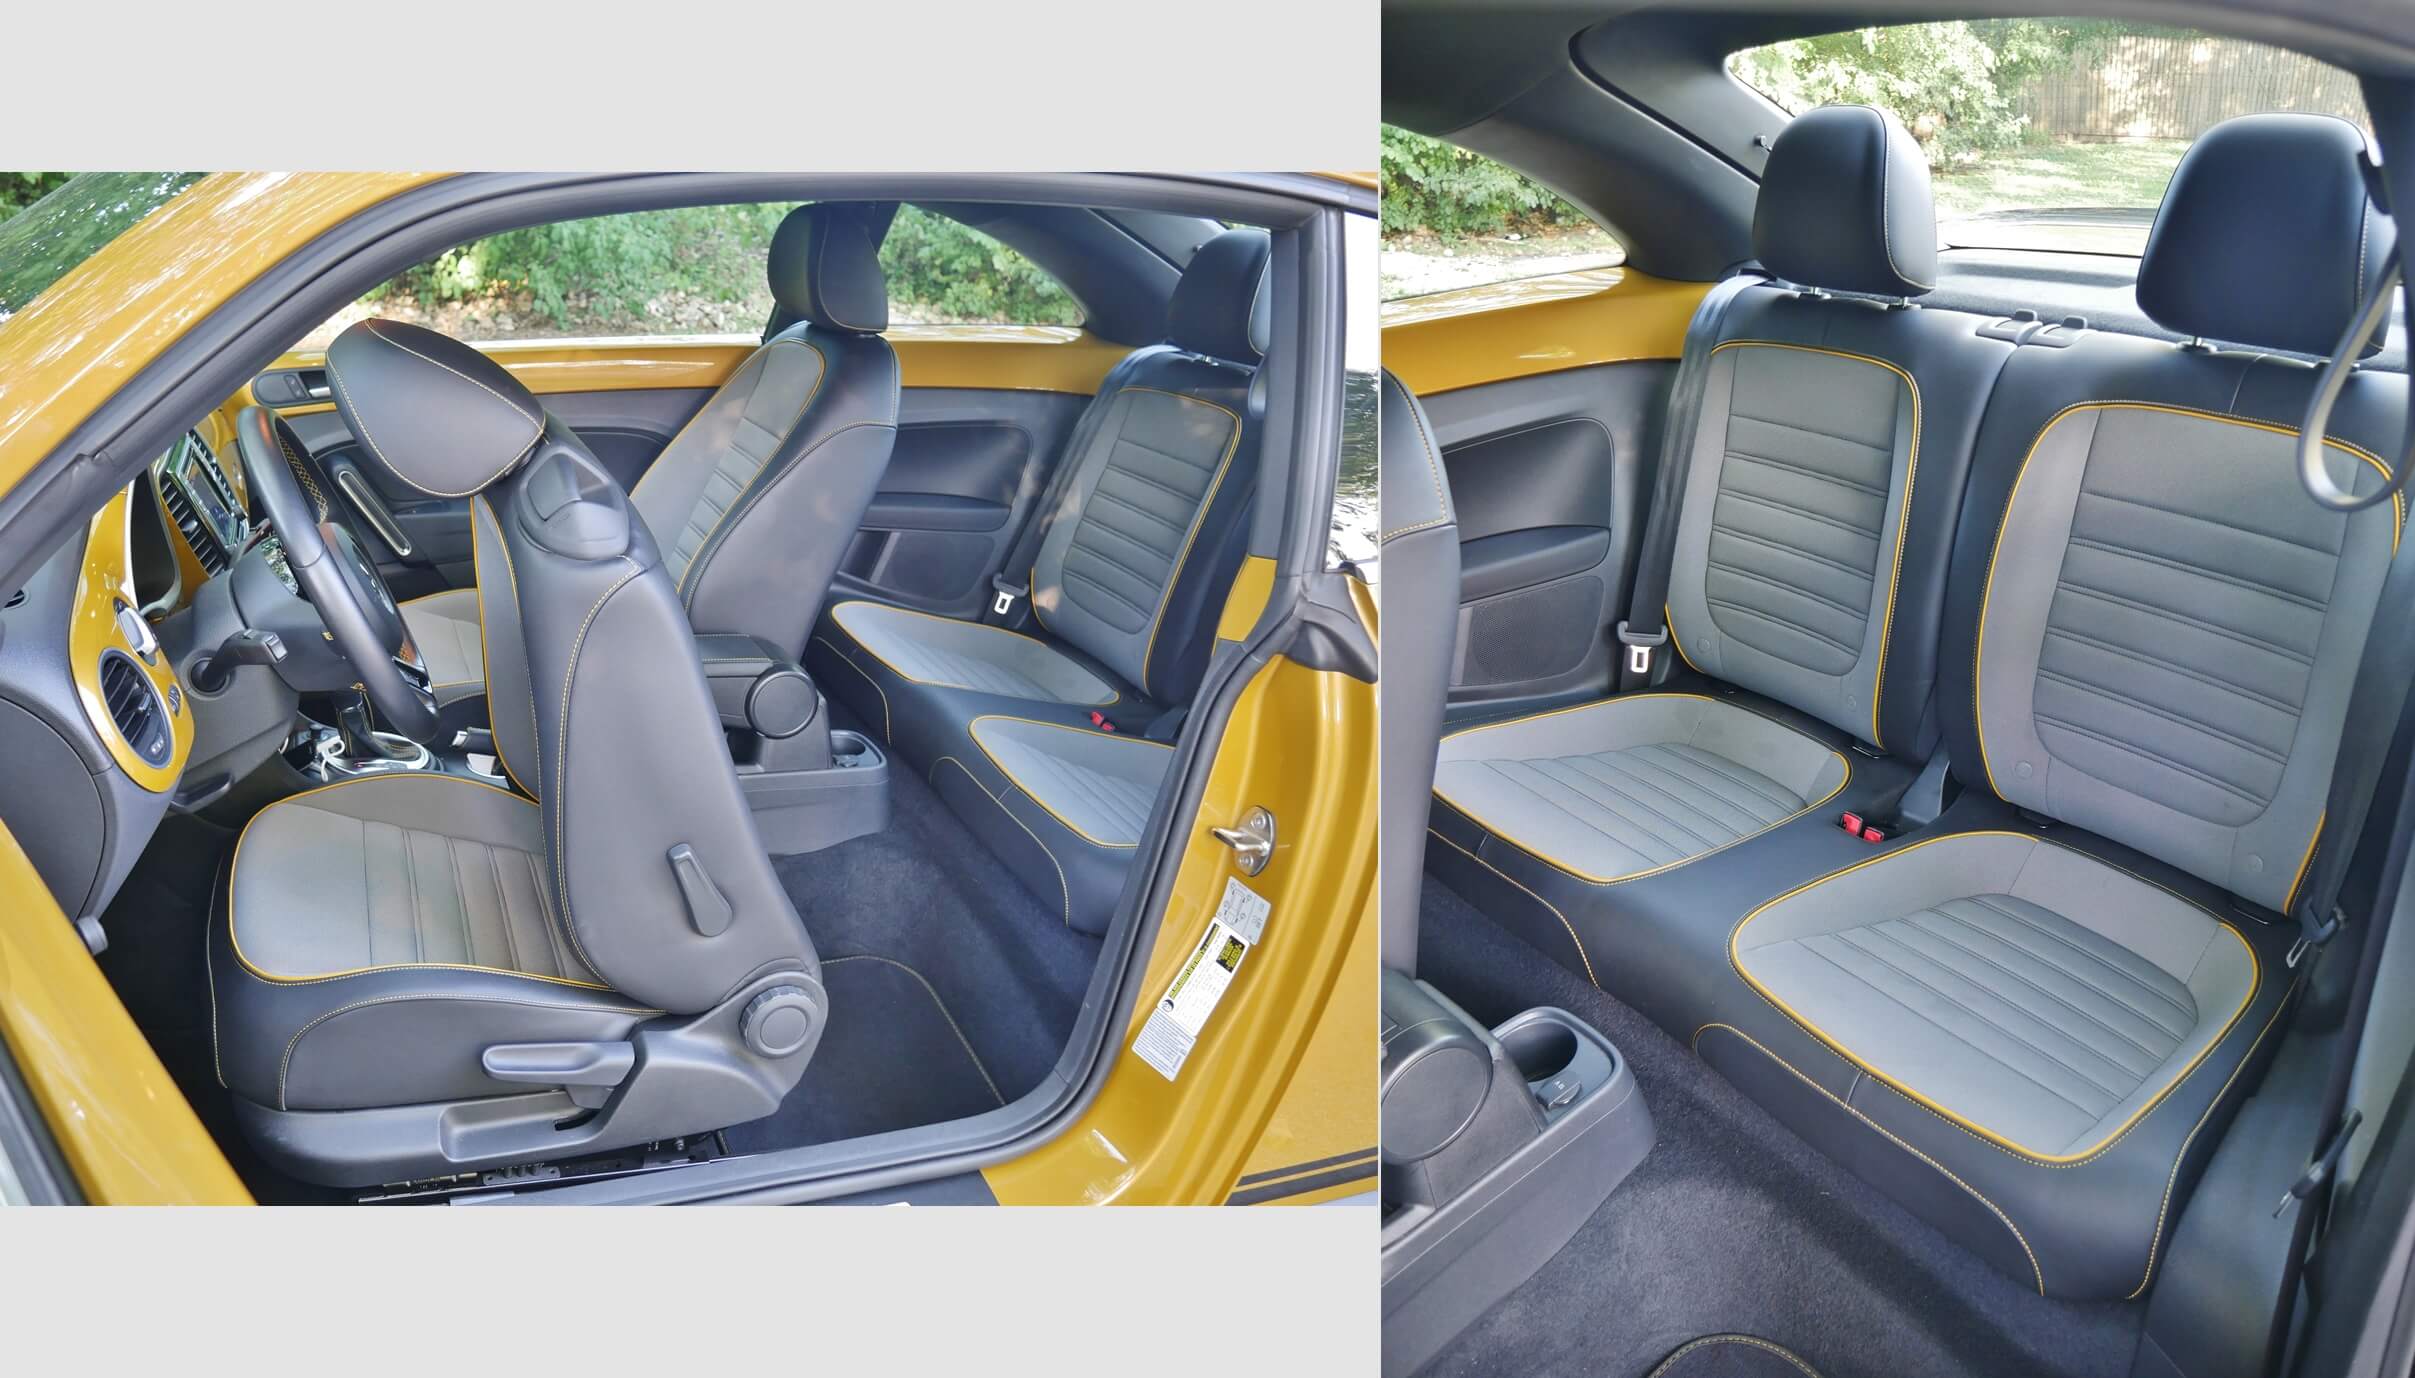 2017 Volkswagen Beetle Dune: Front fold & slide for rear seat access. Note the hanging B-pillar grab straps.